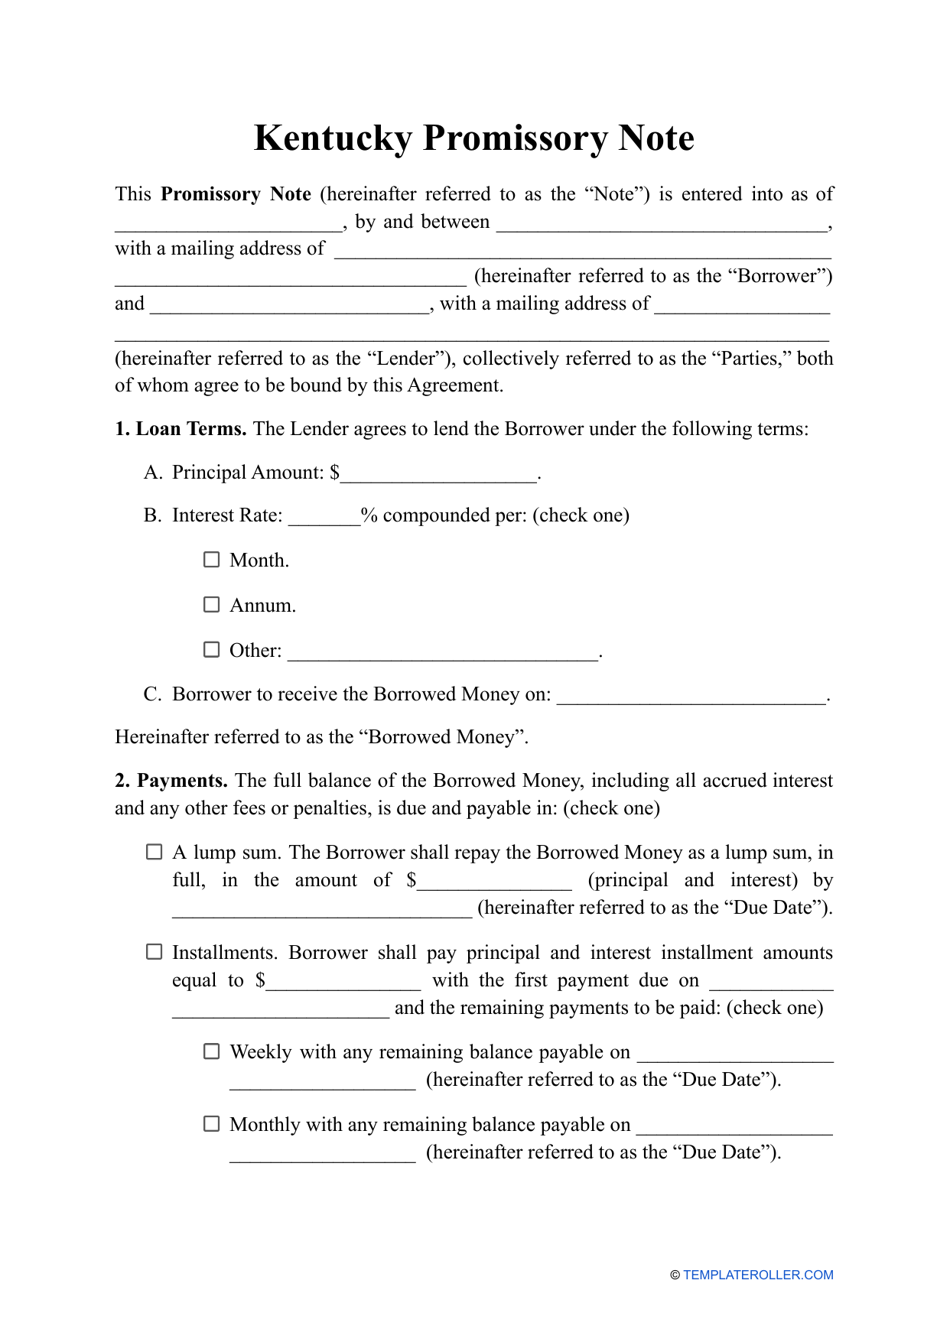 Kentucky Promissory Note Template Fill Out Sign Online and Download